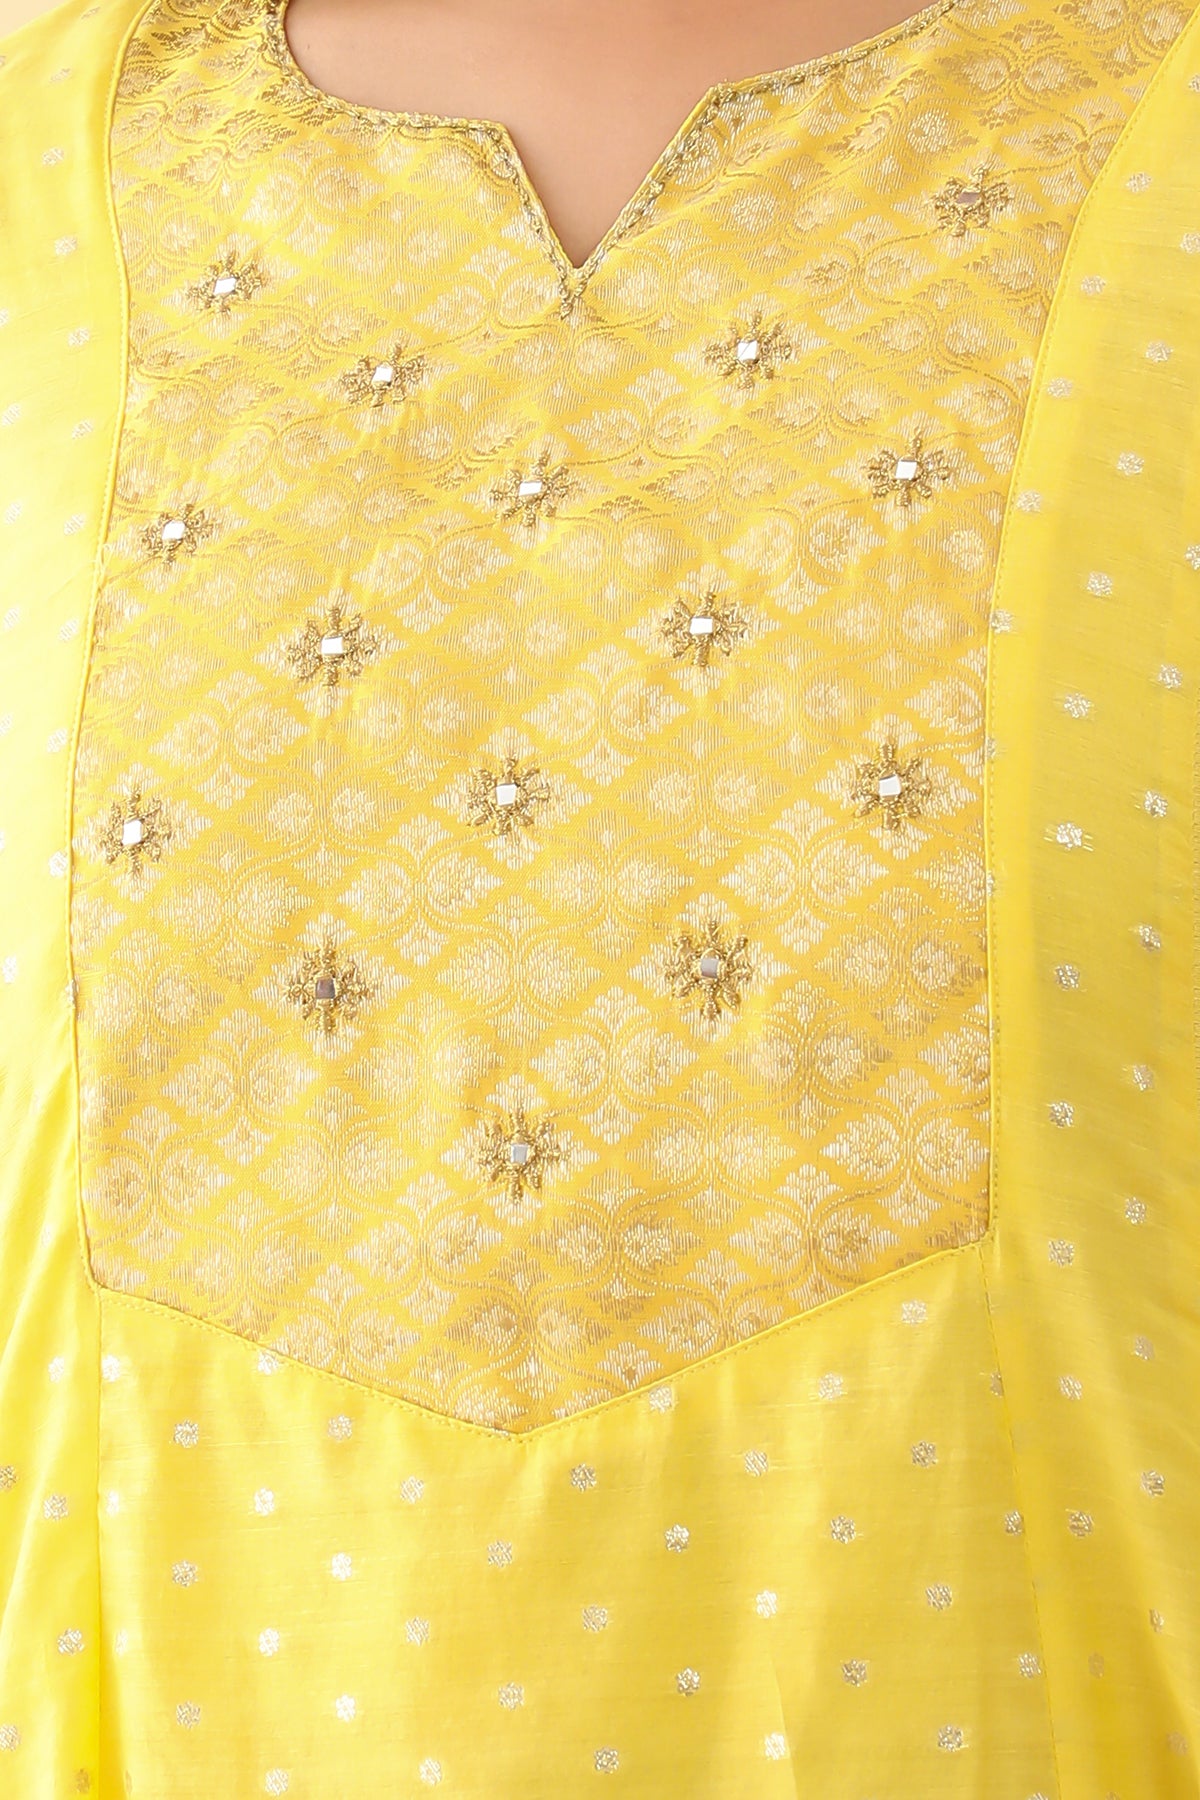 All Over Floral Weave With Brocade Yoke Anarkali - Yellow